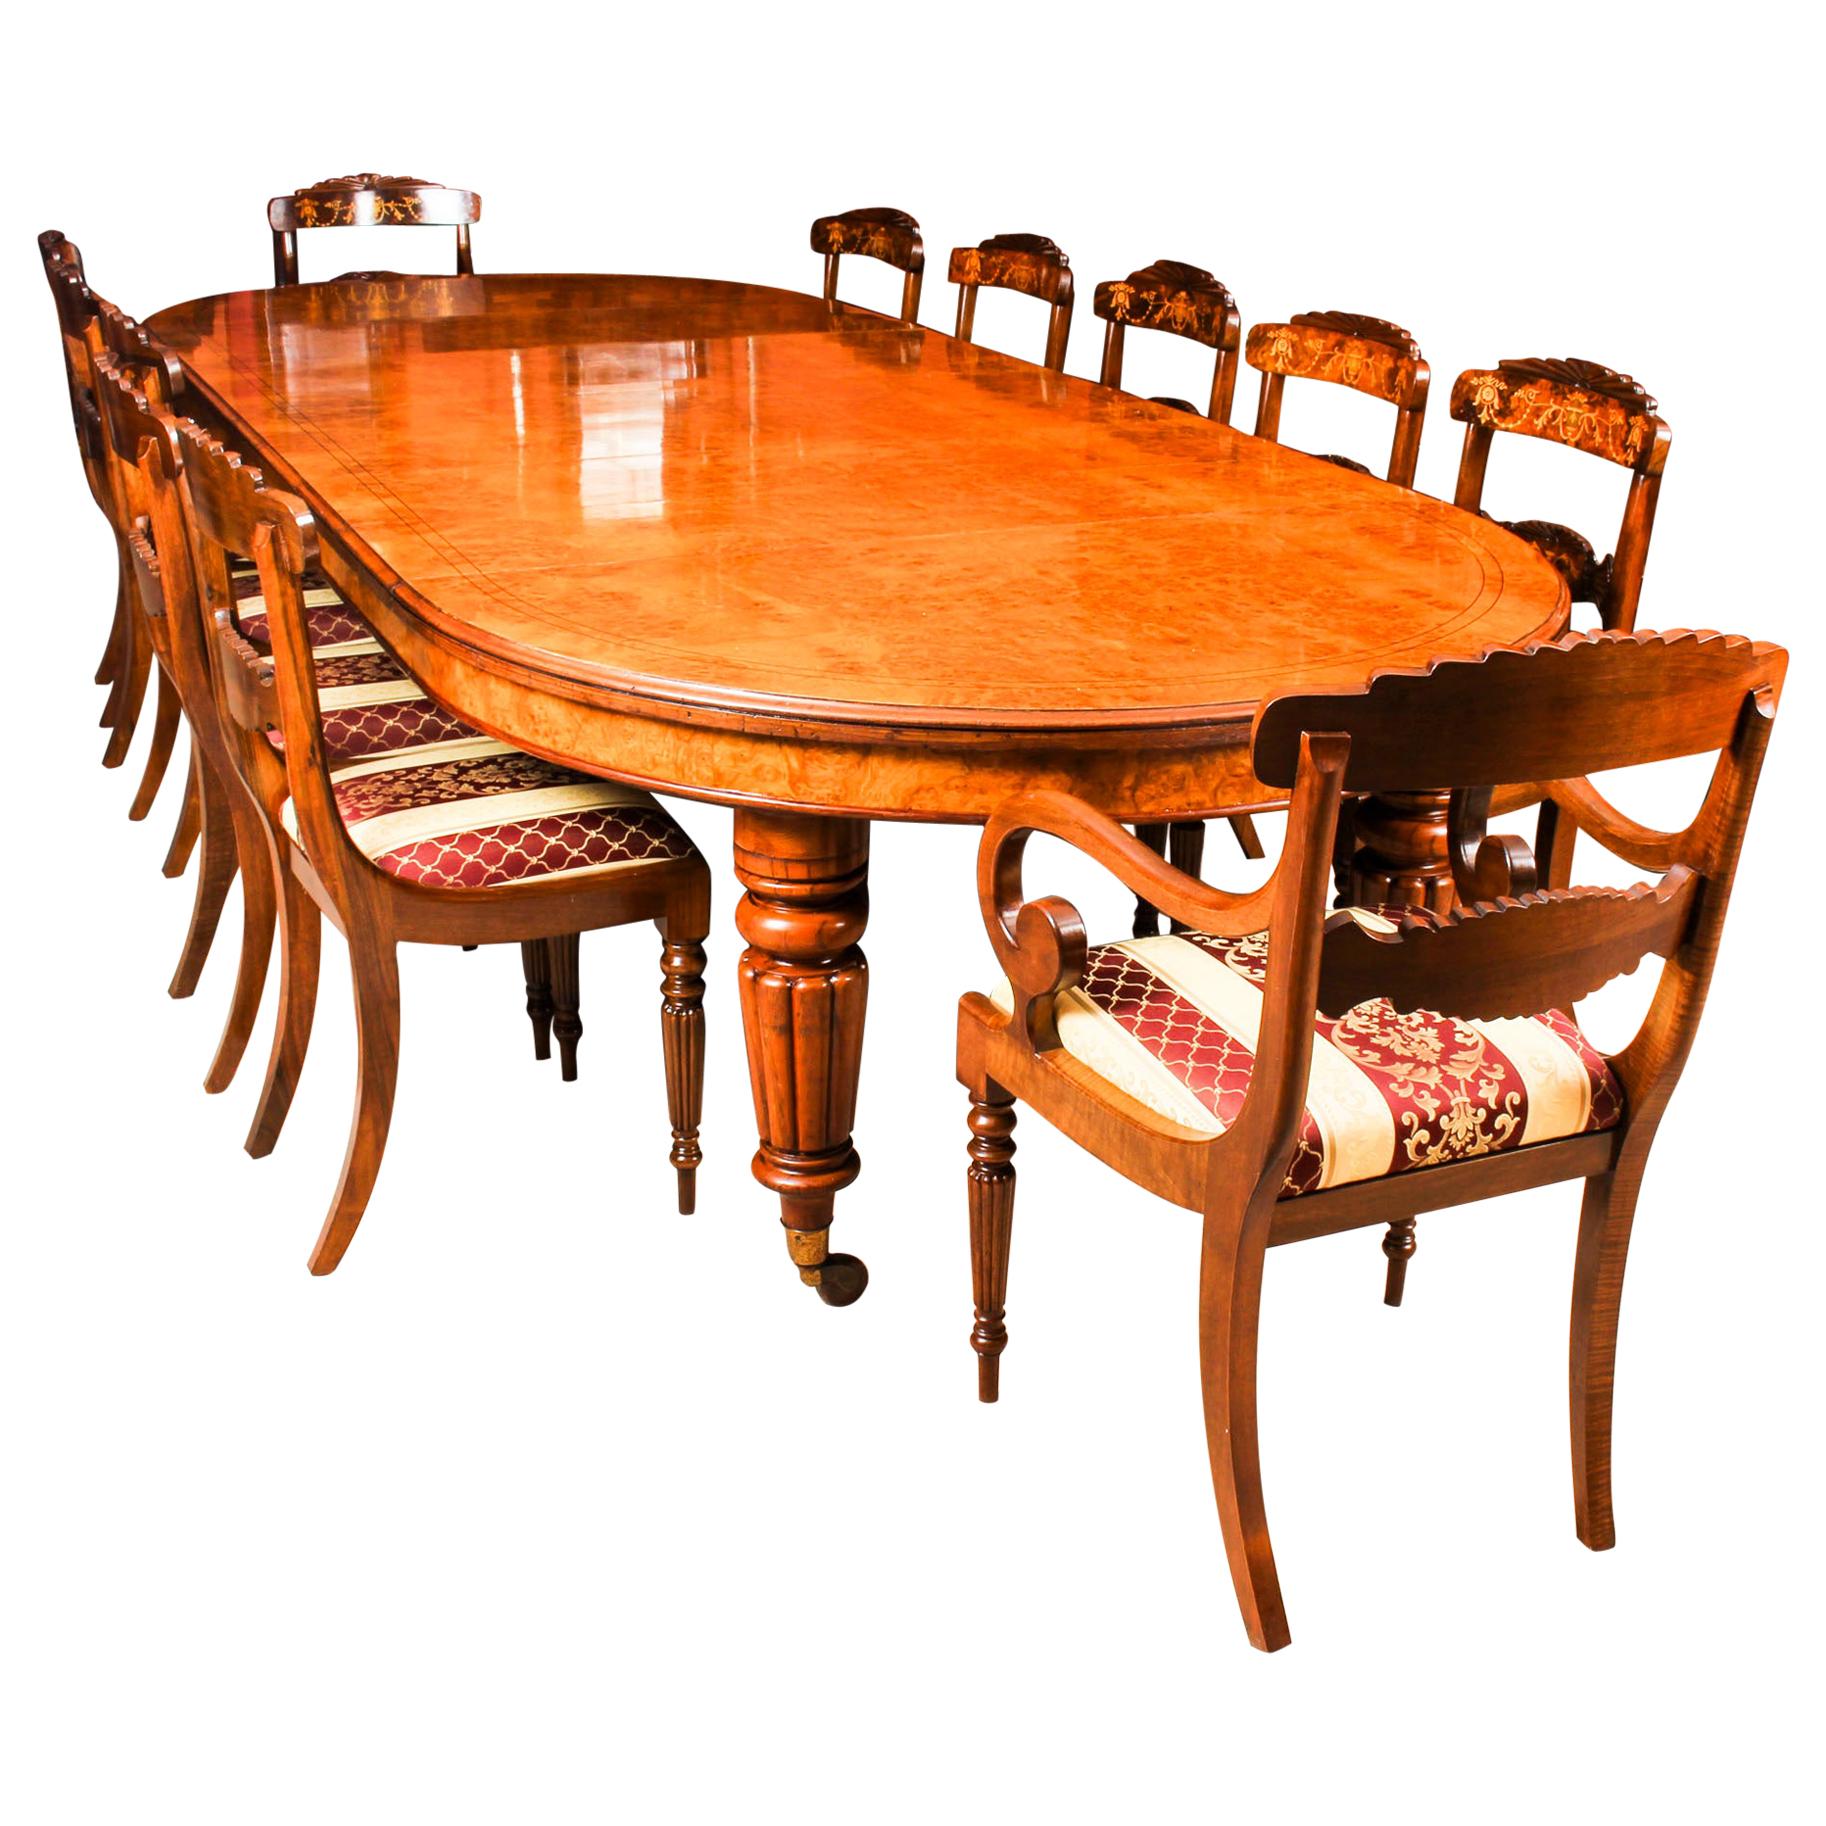 Antique Pollard Oak Victorian Dining Table 19th Century and 12 Bespoke Chairs